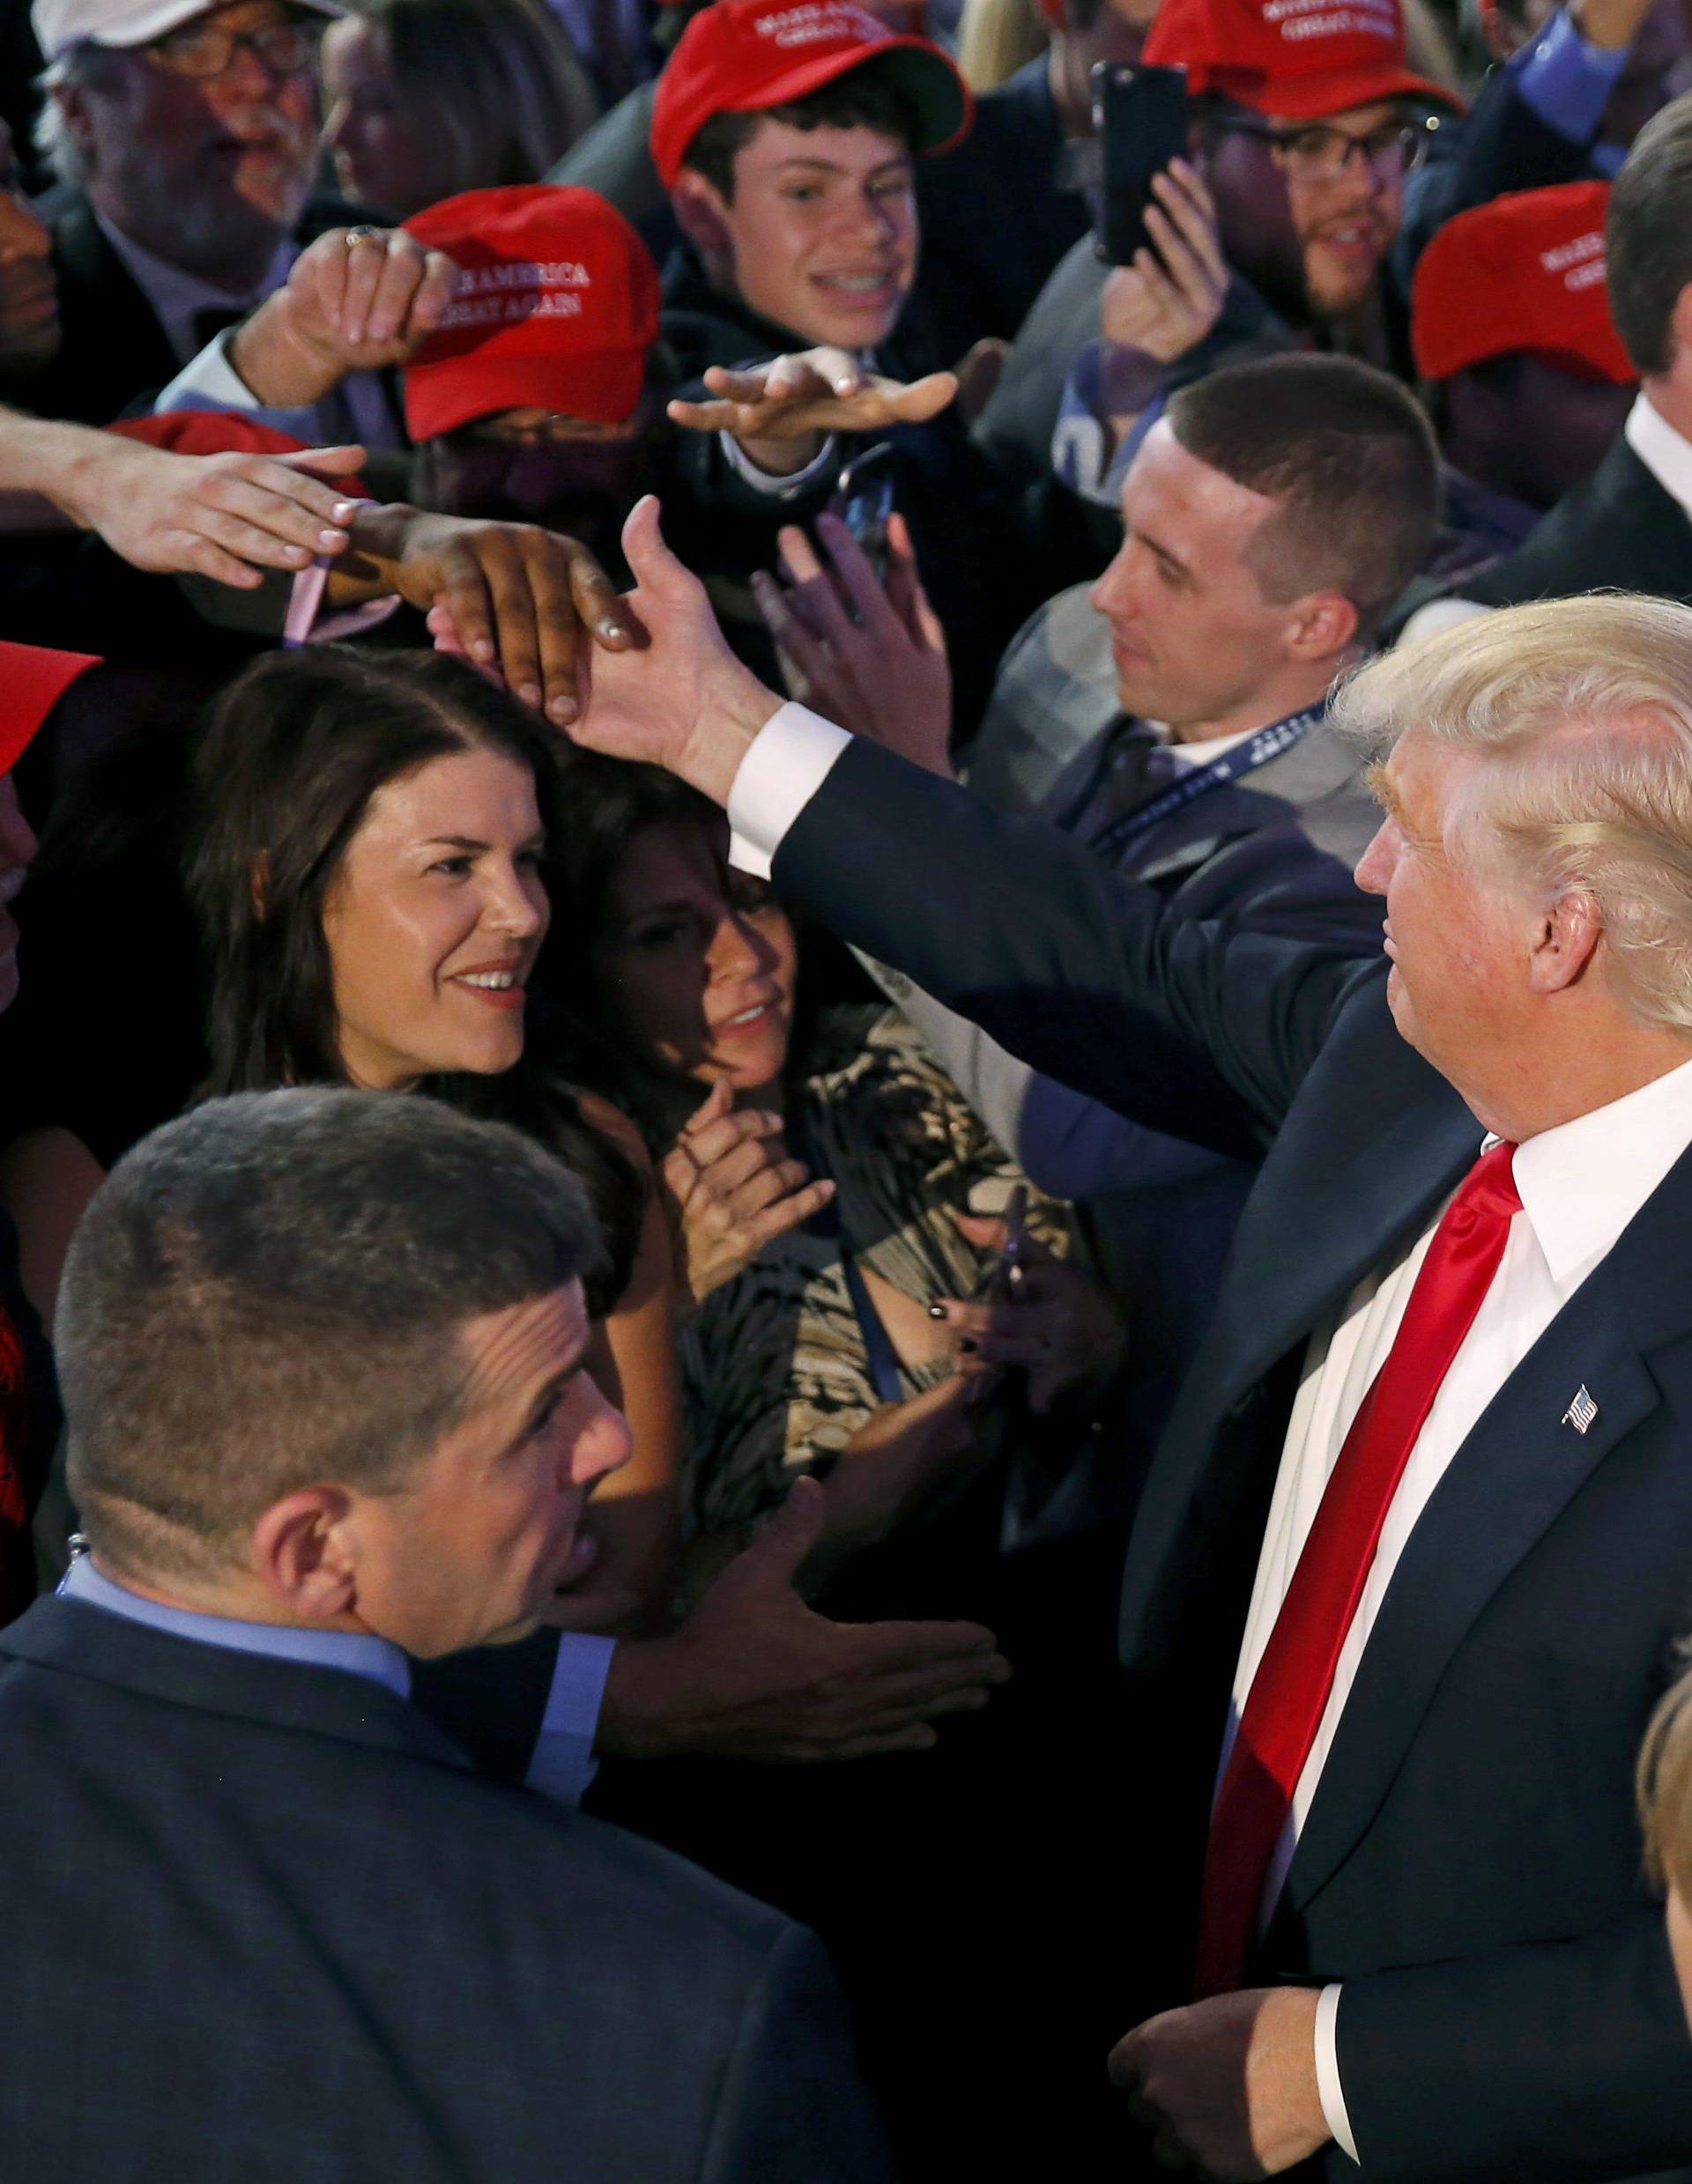 Republican U.S. presidential nominee Donald Trump greets supporters at his election night rally in Manhattan